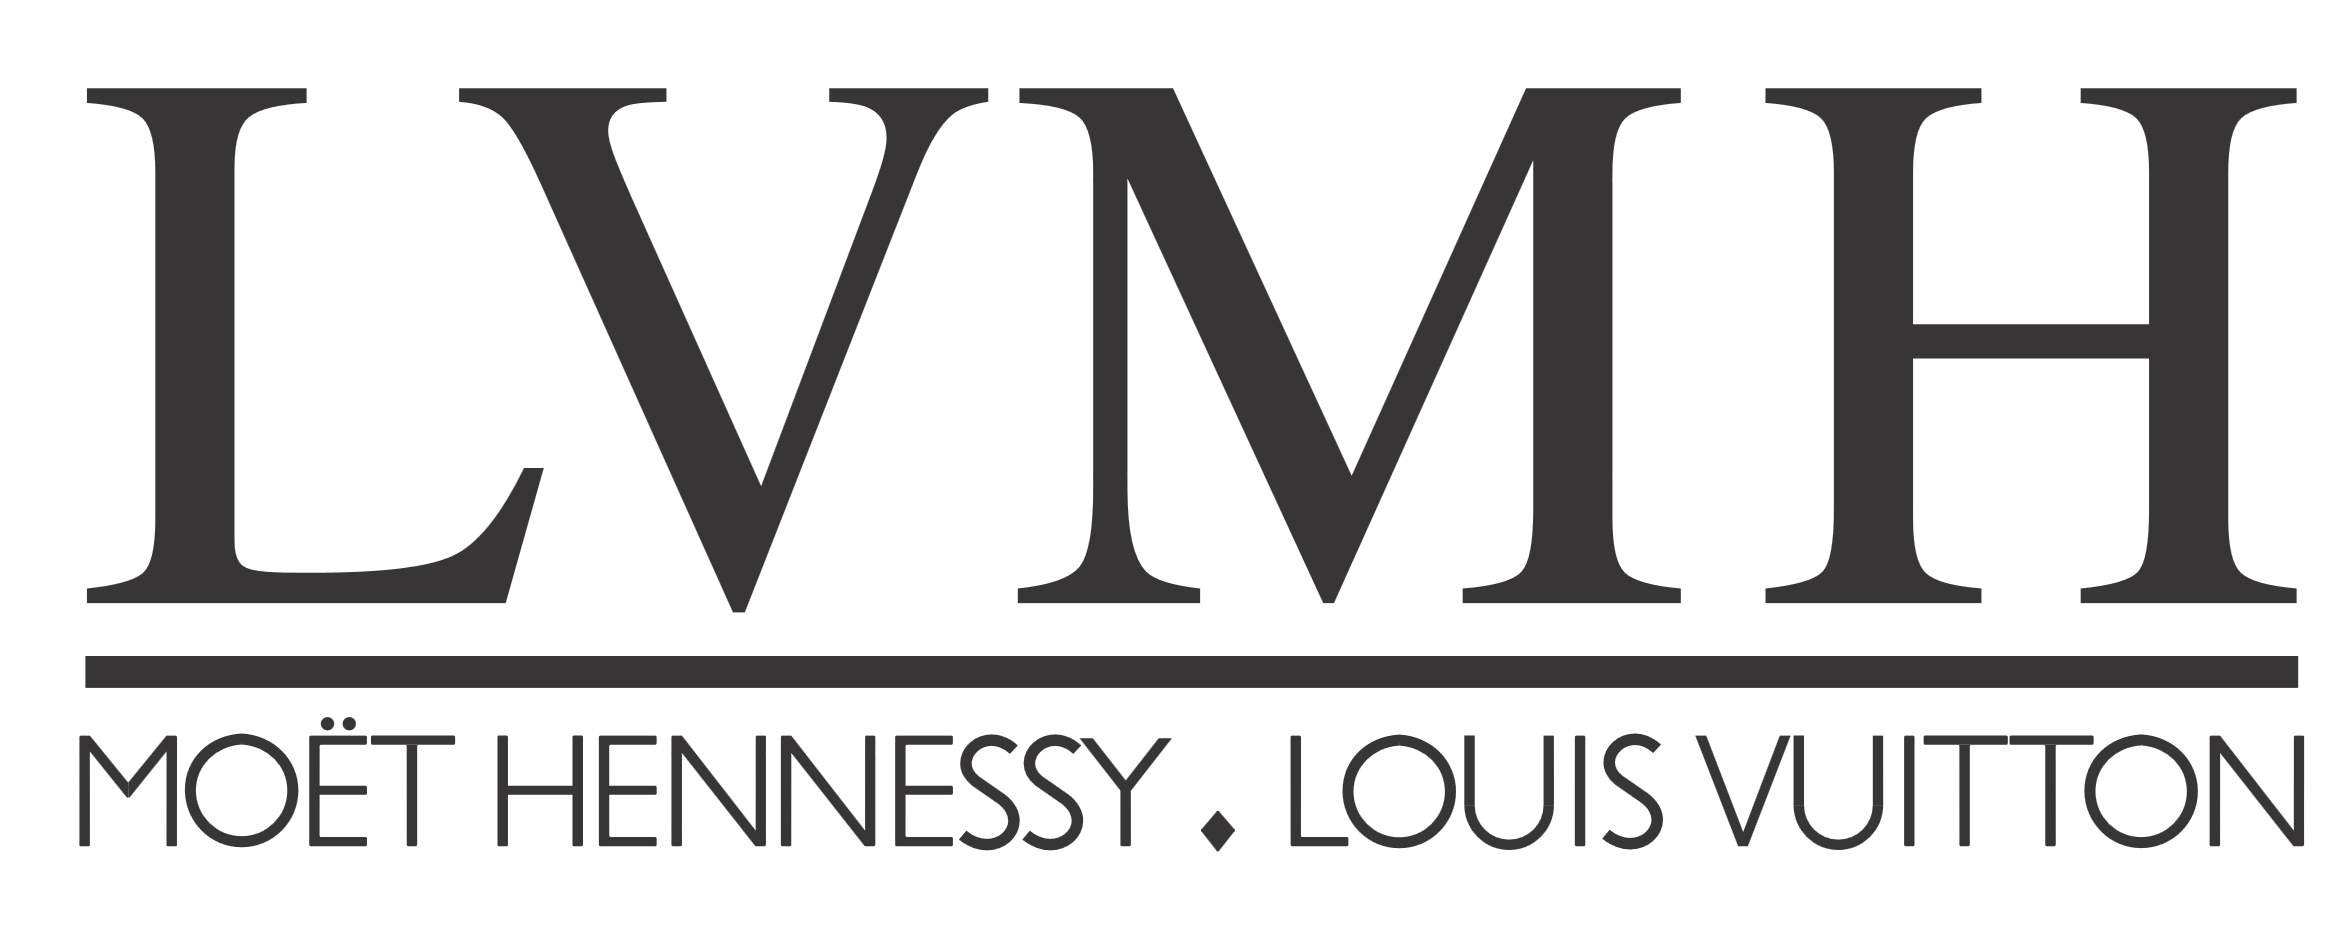 LVMH_logo_logotype_Moët_Hennessy_Louis_Vuitton.png